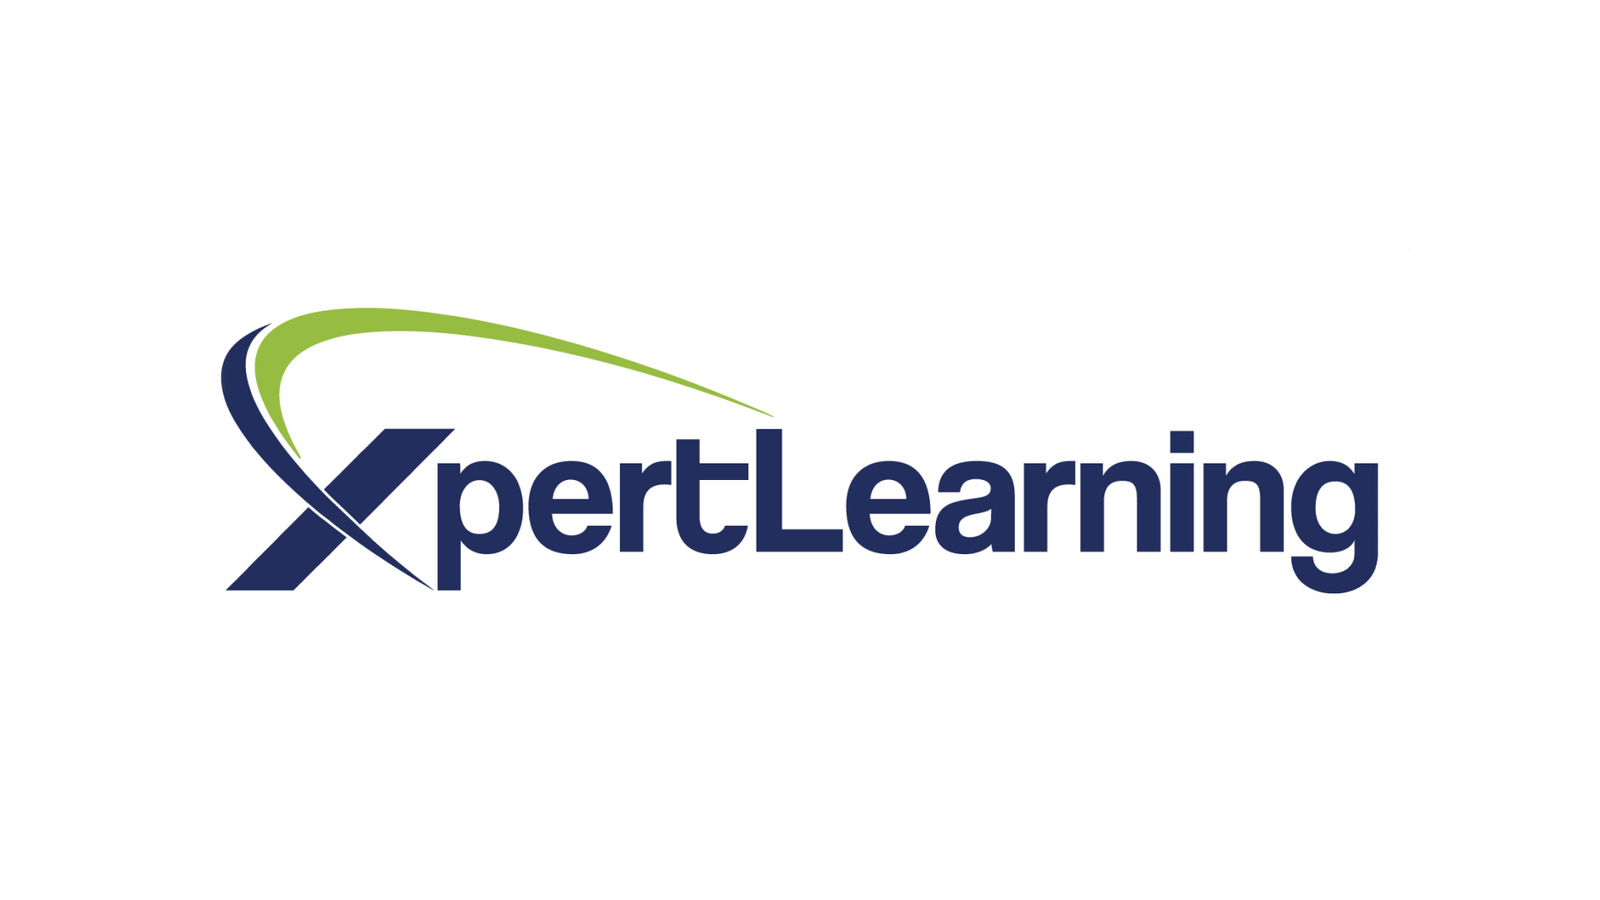 XpertLearning